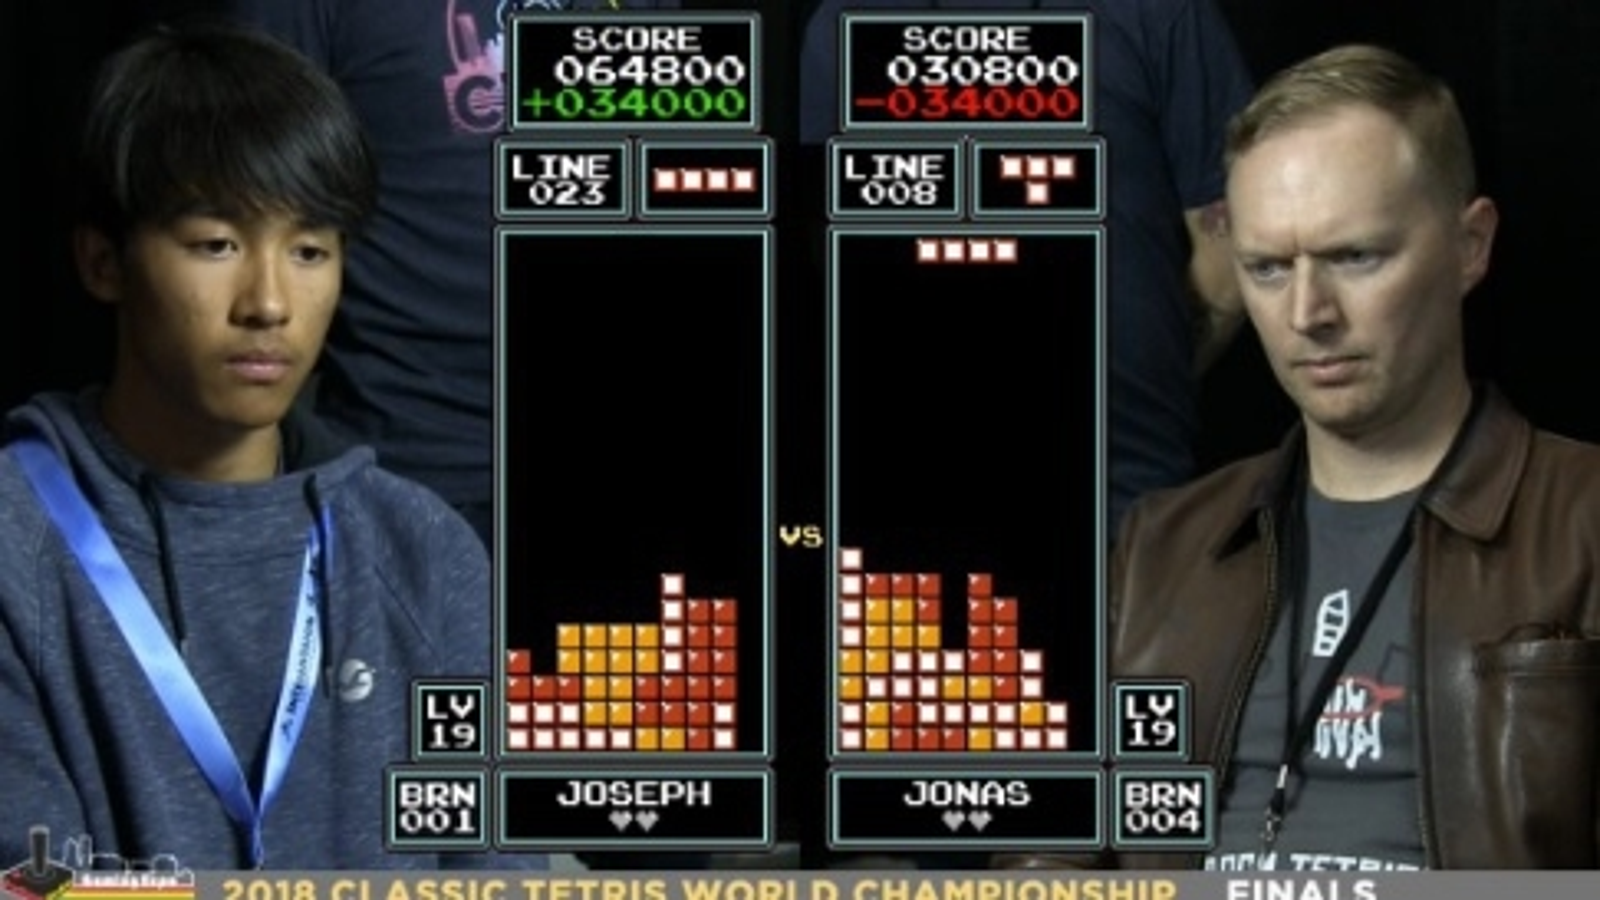 16-year-old Tetris prodigy defeats seven-time world champion to